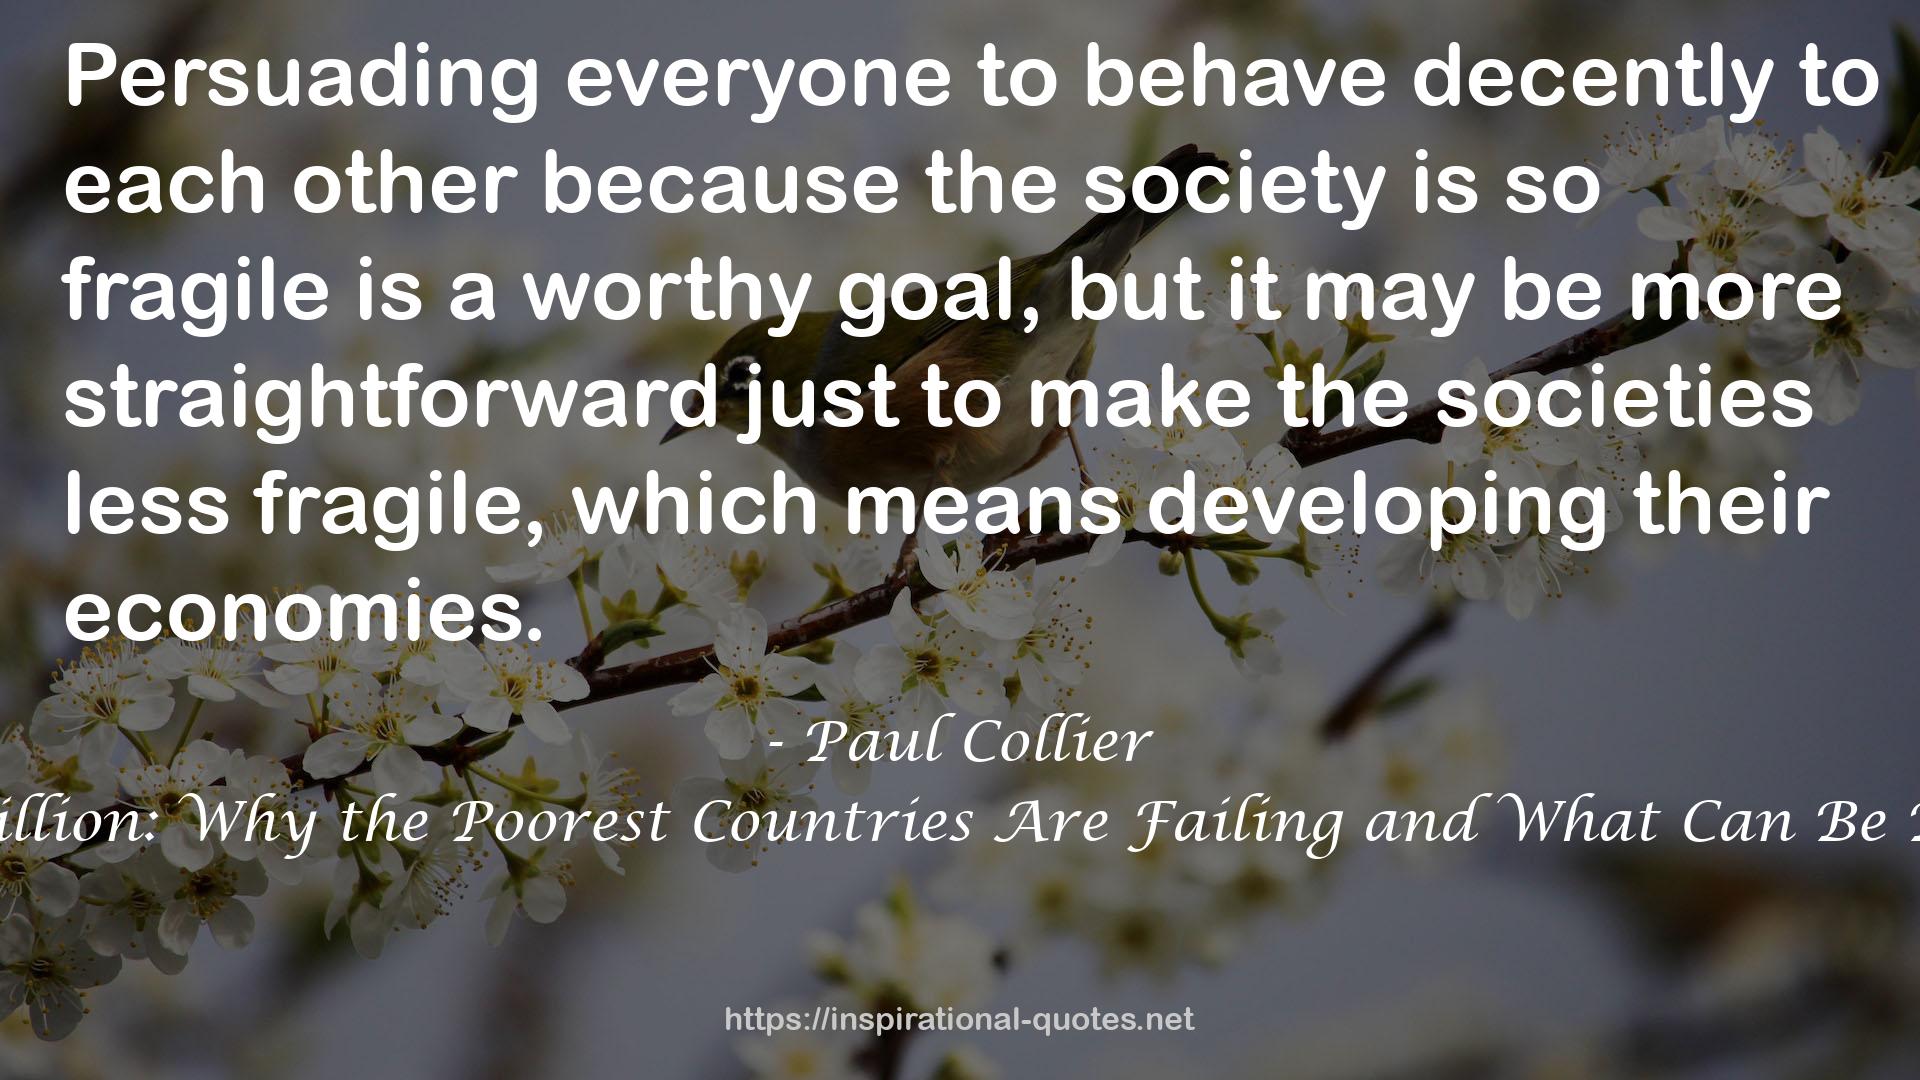 Paul Collier QUOTES